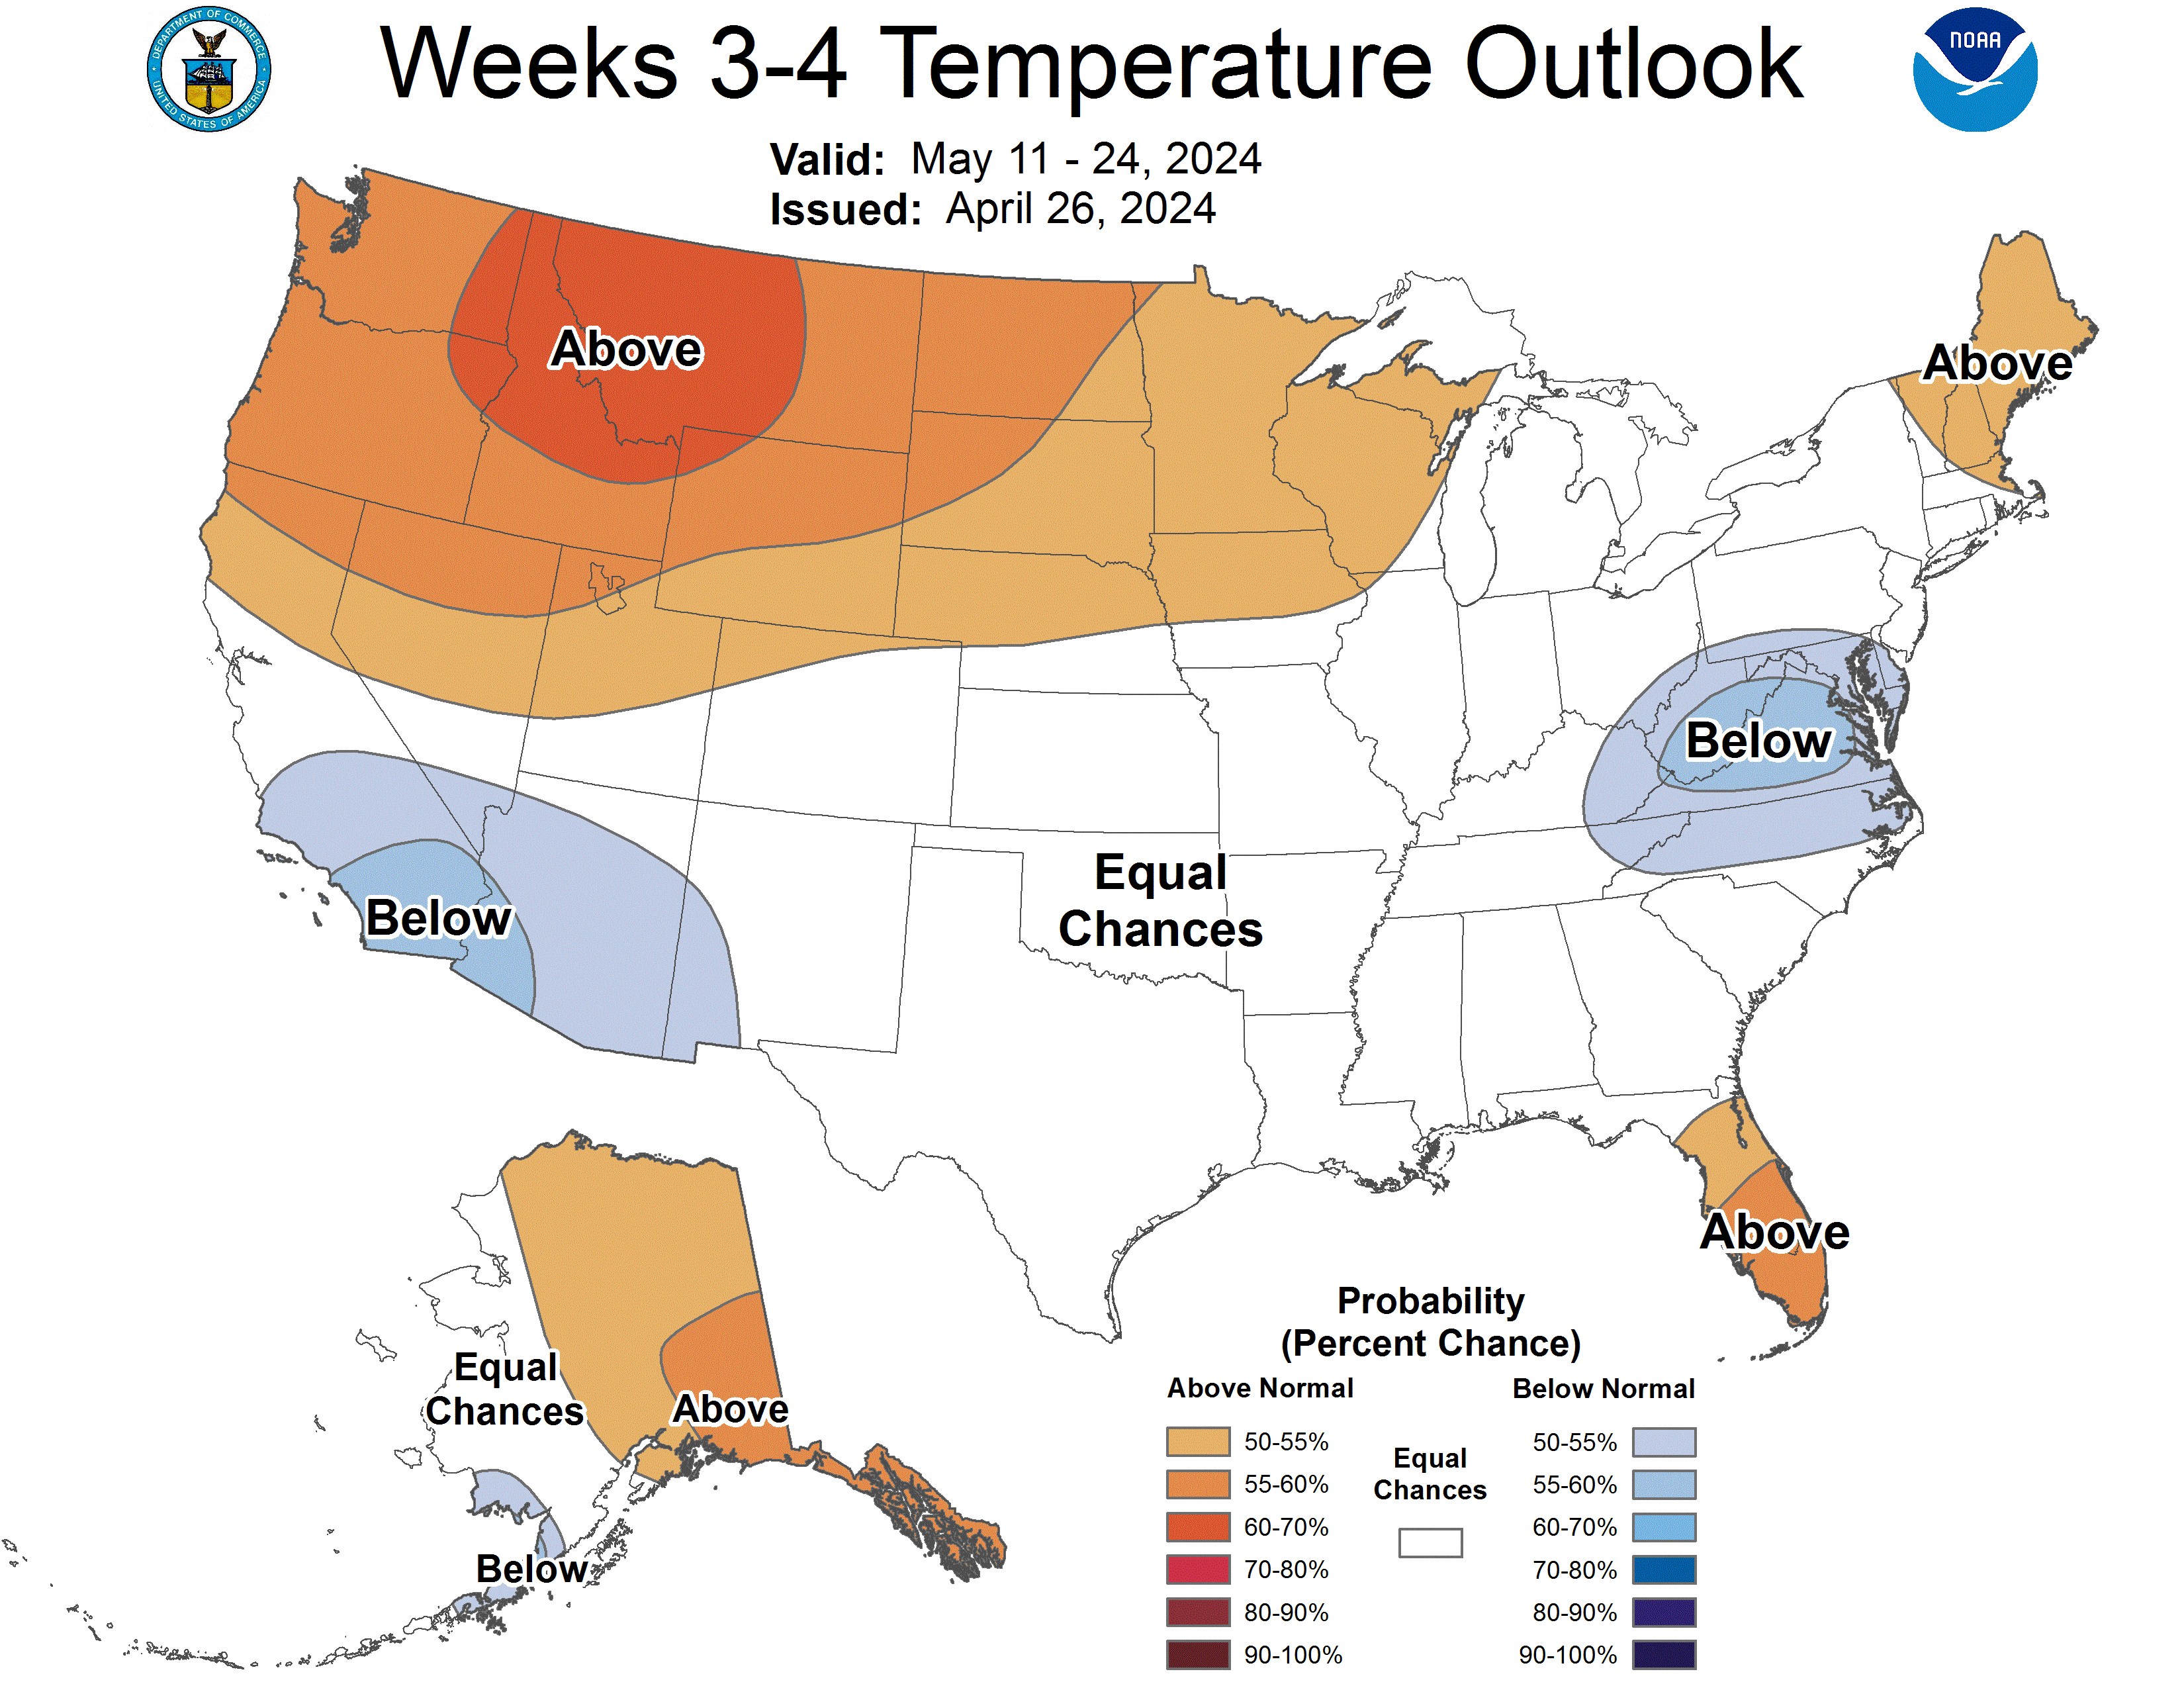 https://www.cpc.ncep.noaa.gov/products/predictions/WK34/gifs/WK34temp.gif